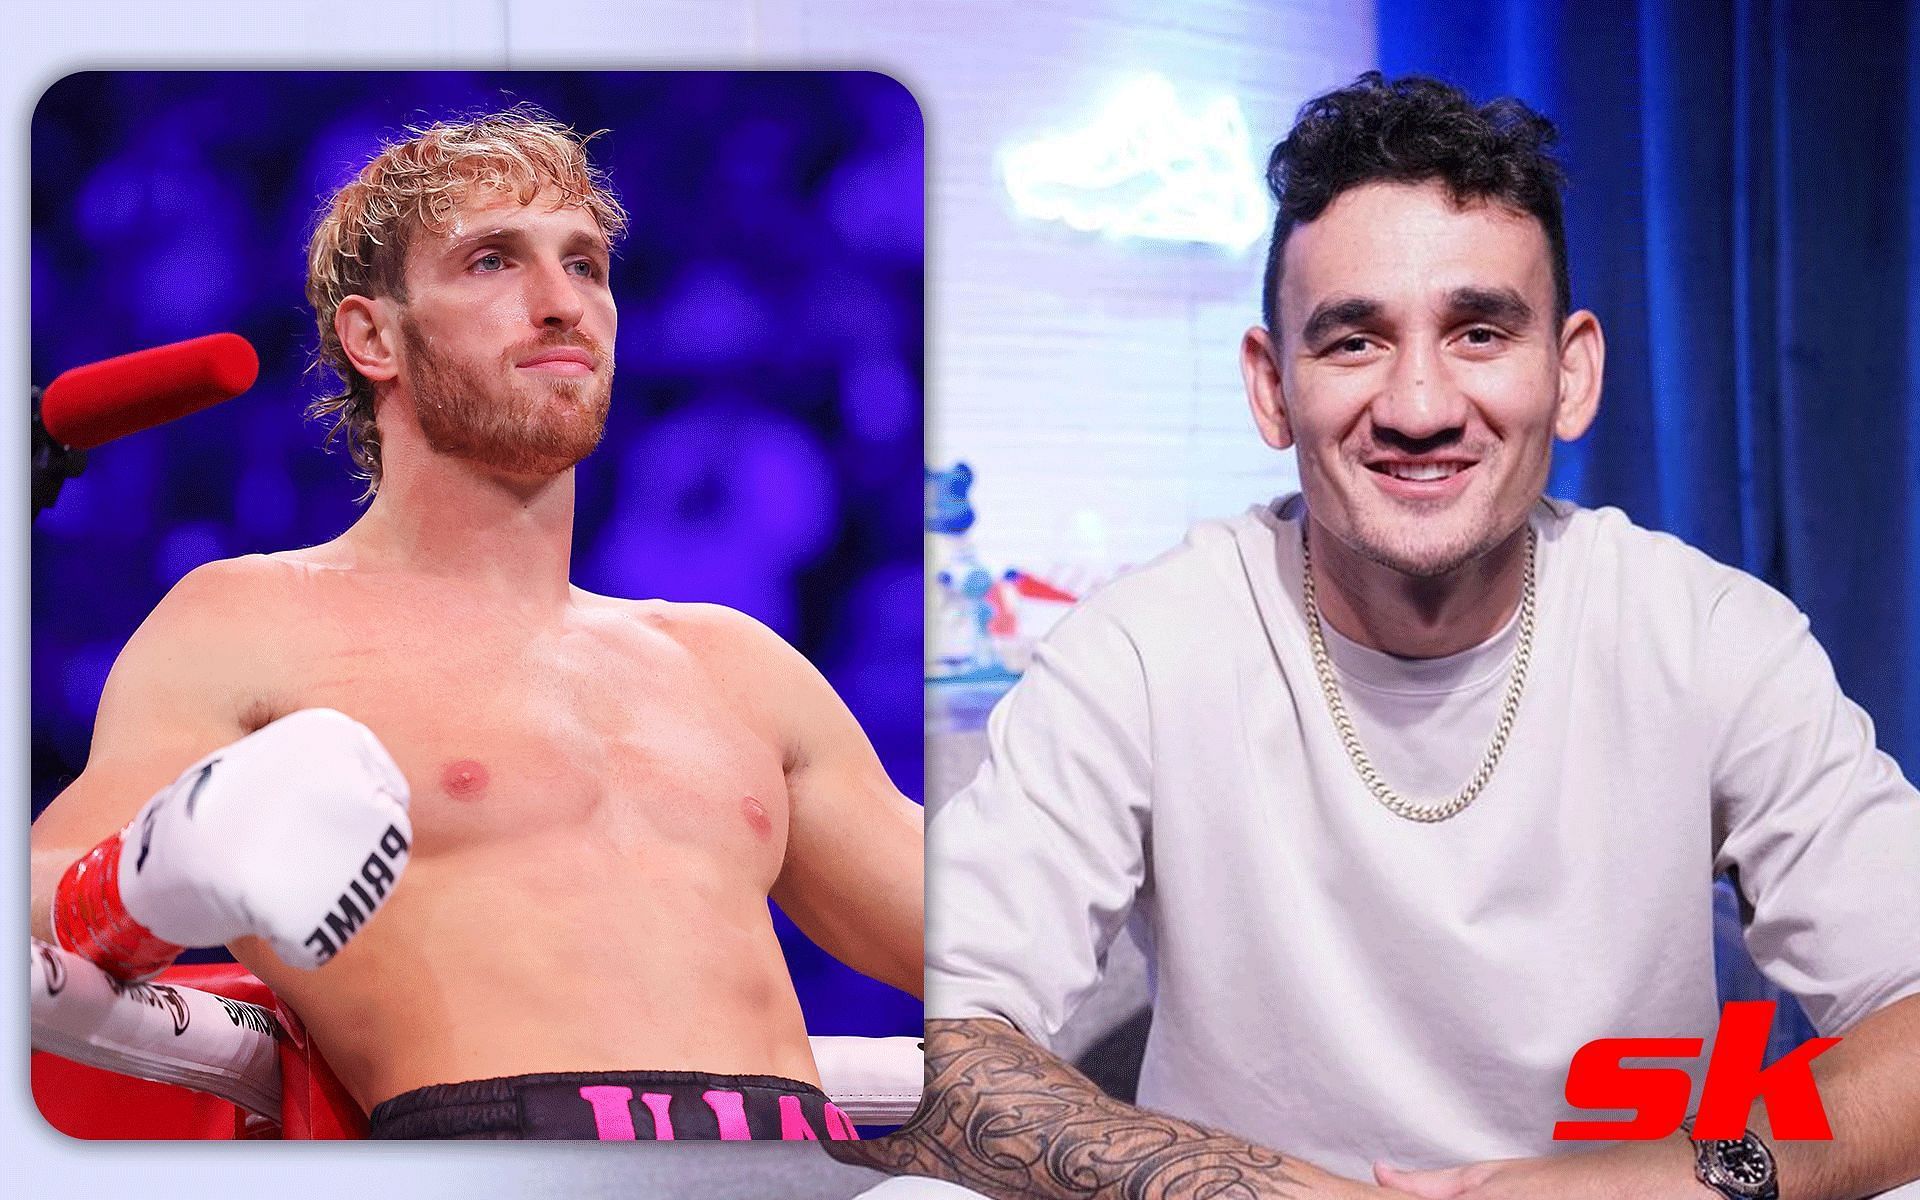 Logan Paul (left) Max Holloway (right) [Image courtey Getty Images, @blessedmma on Instagram]